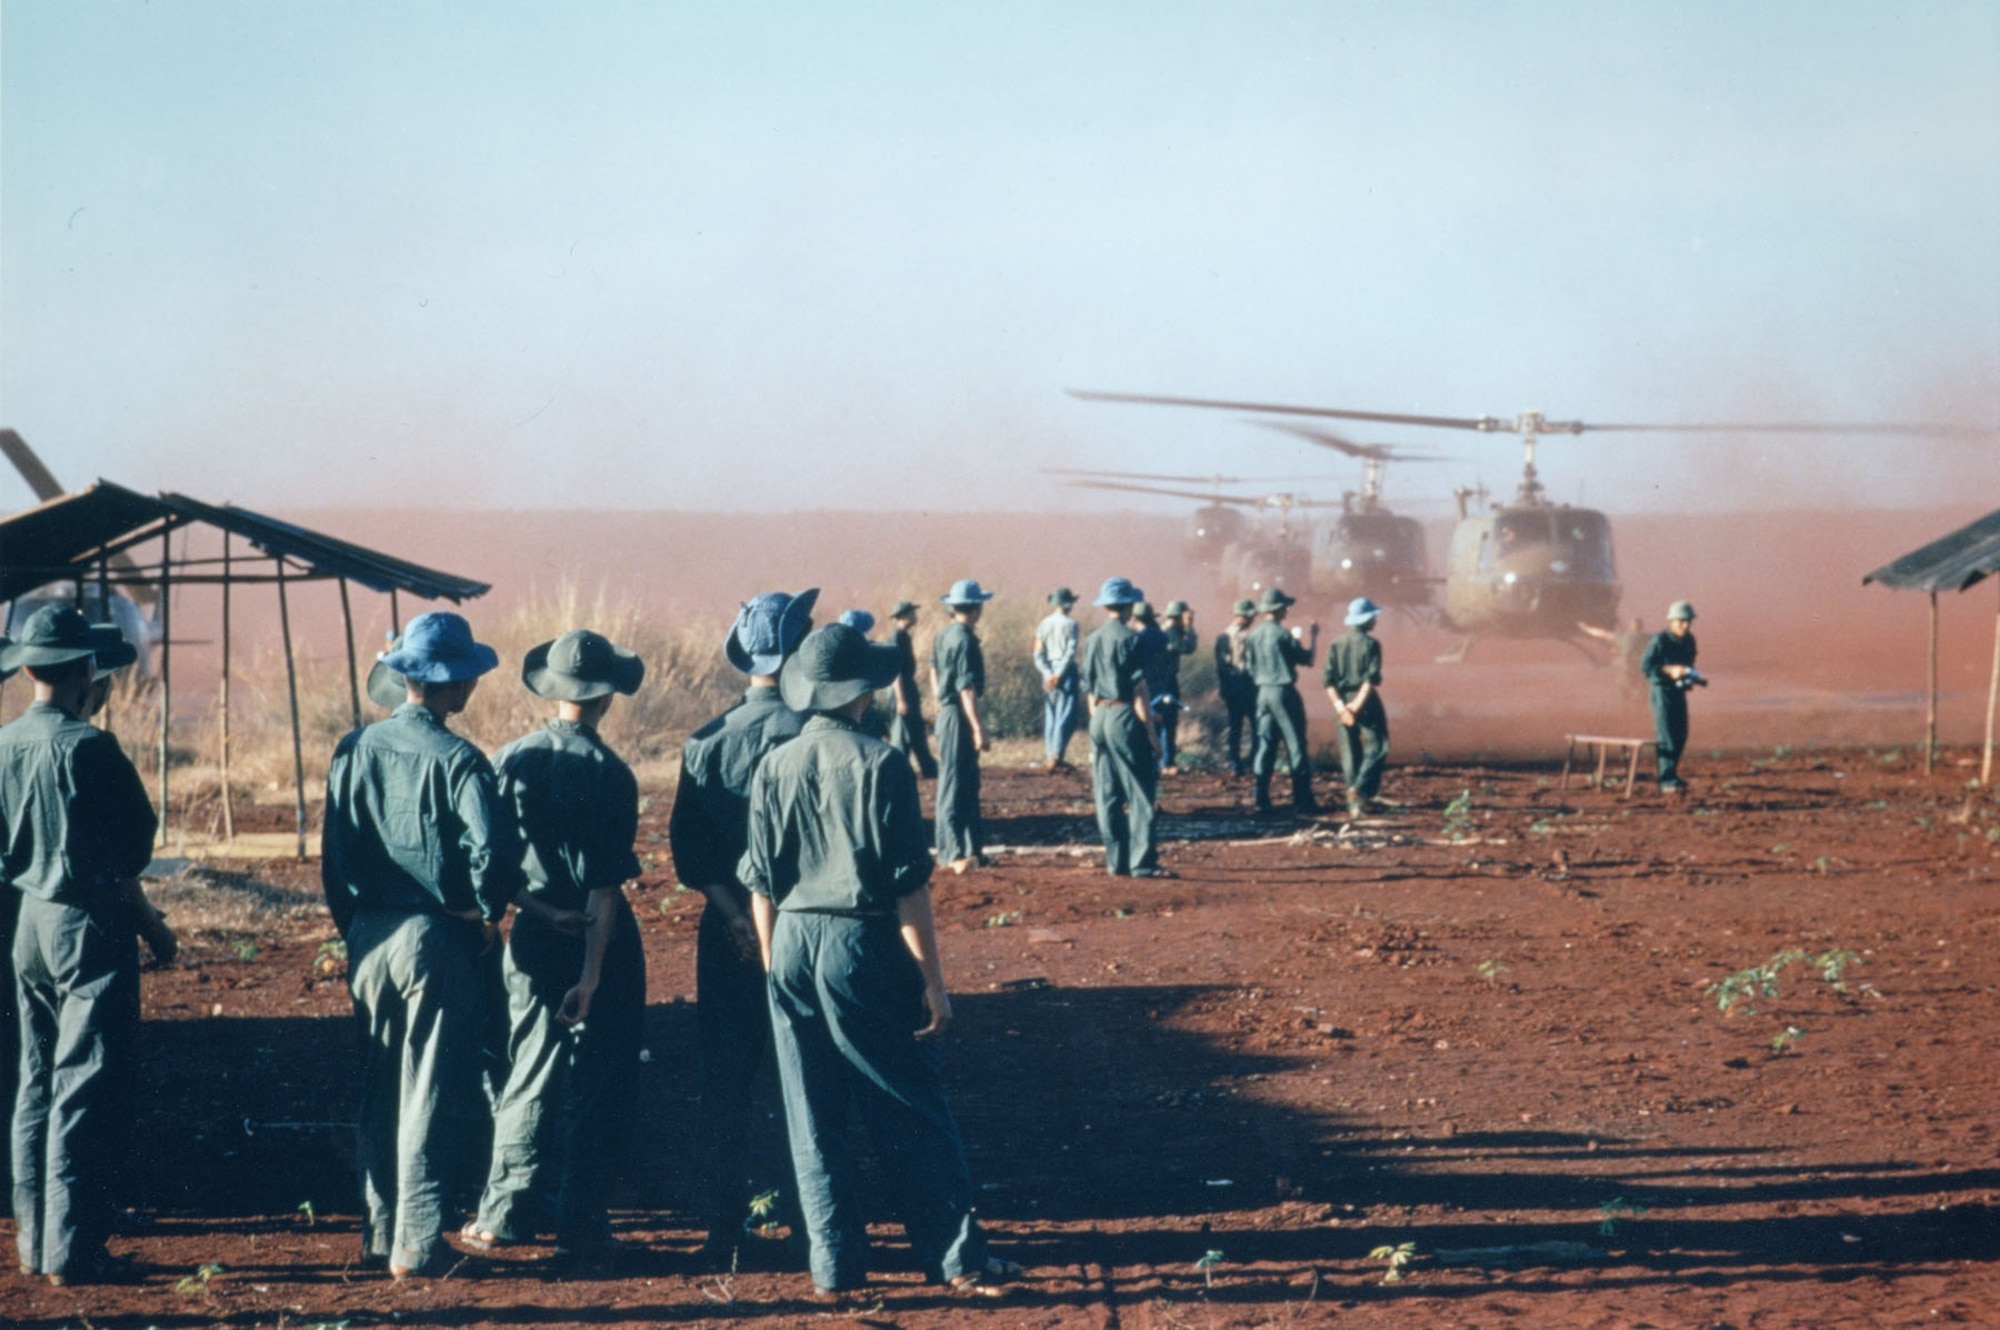 United Nations personnel observe the POW exchange at Loc Ninh, Feb. 1, 1973. (U.S. Air Force photo)